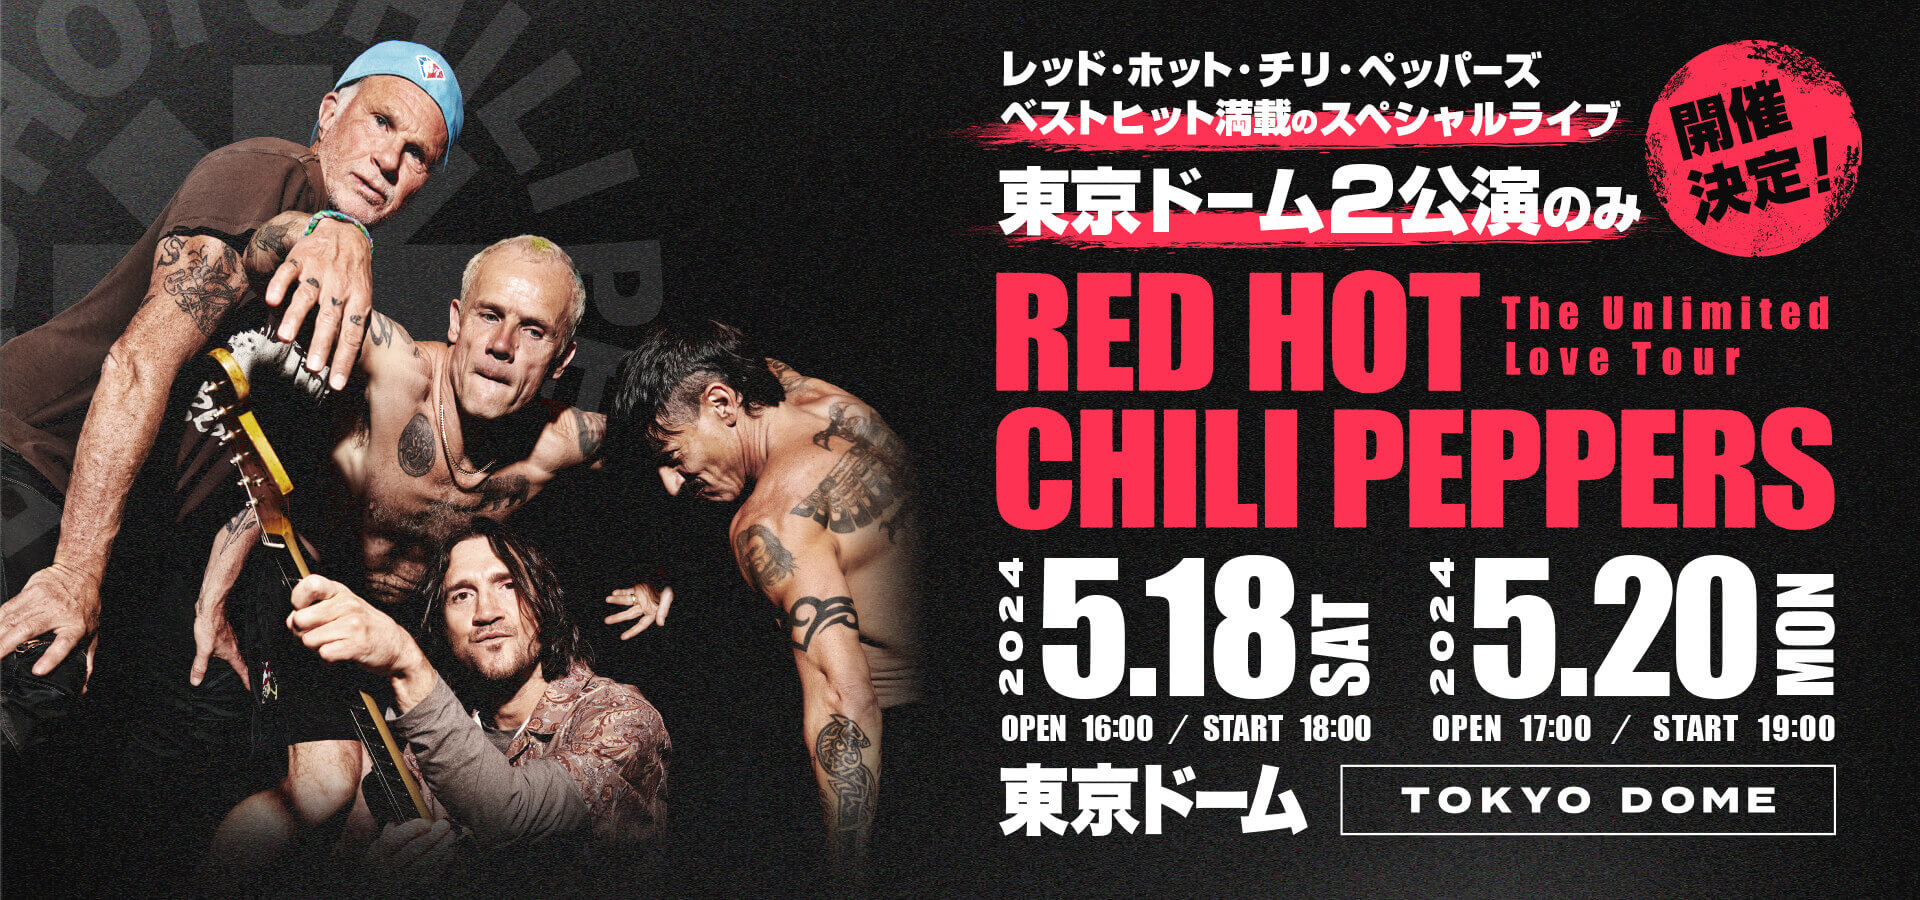 RED HOT CHILI PEPPERS The Unlimited Love Tour